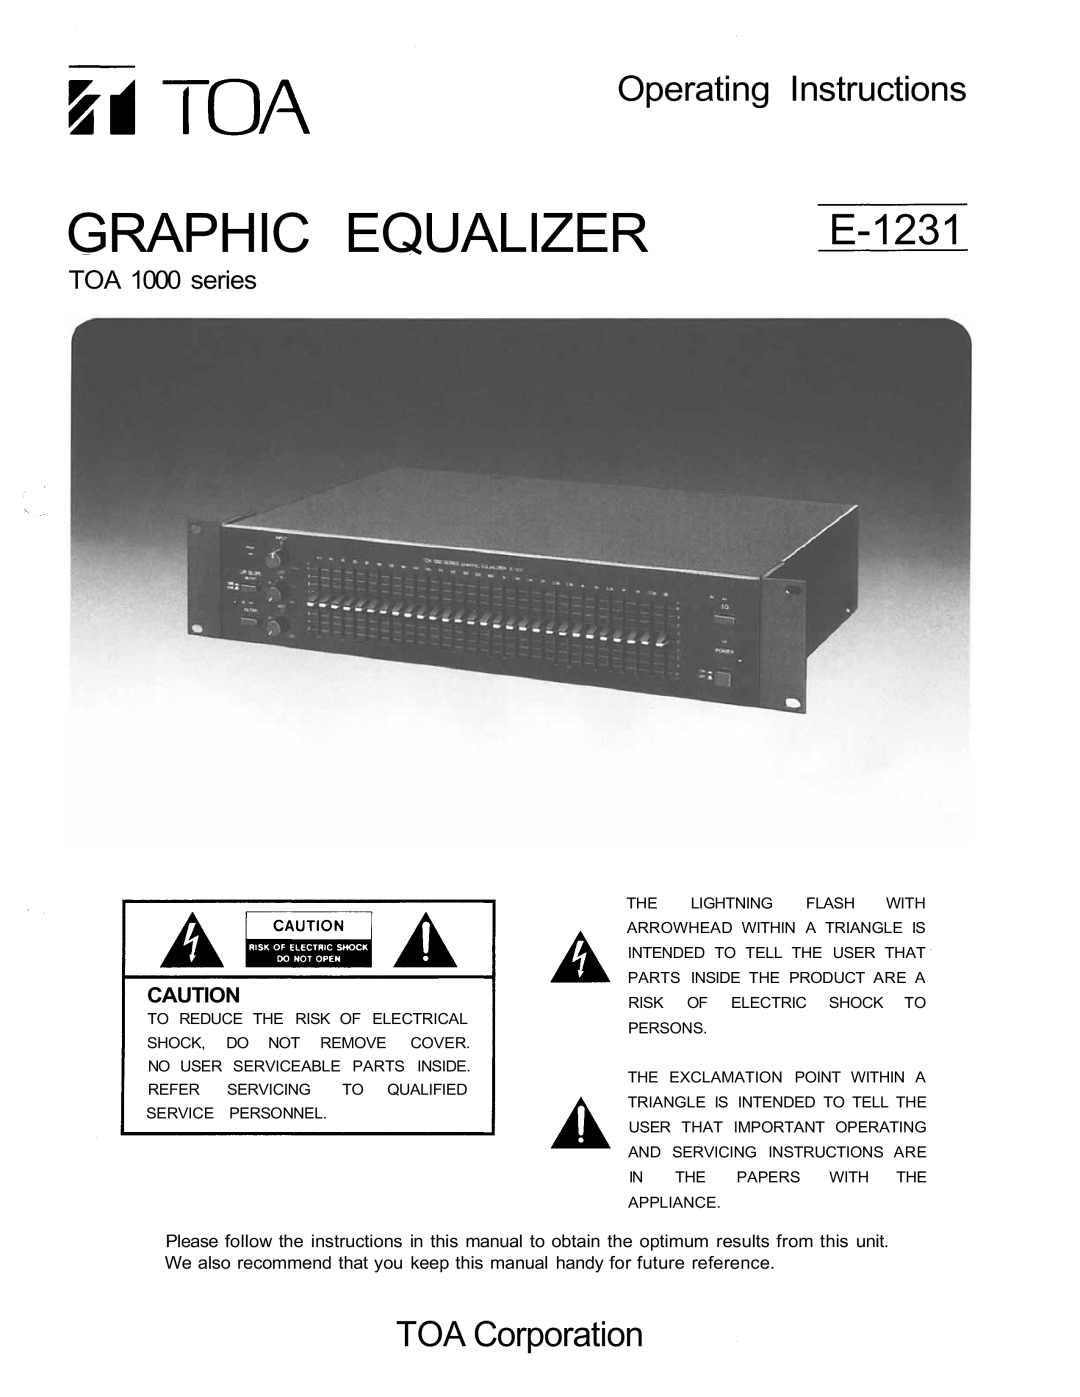 TOA Electronics 1000 Series user service Graphic Equalizer, E-1231, Operating Instructions, TOA Corporation 